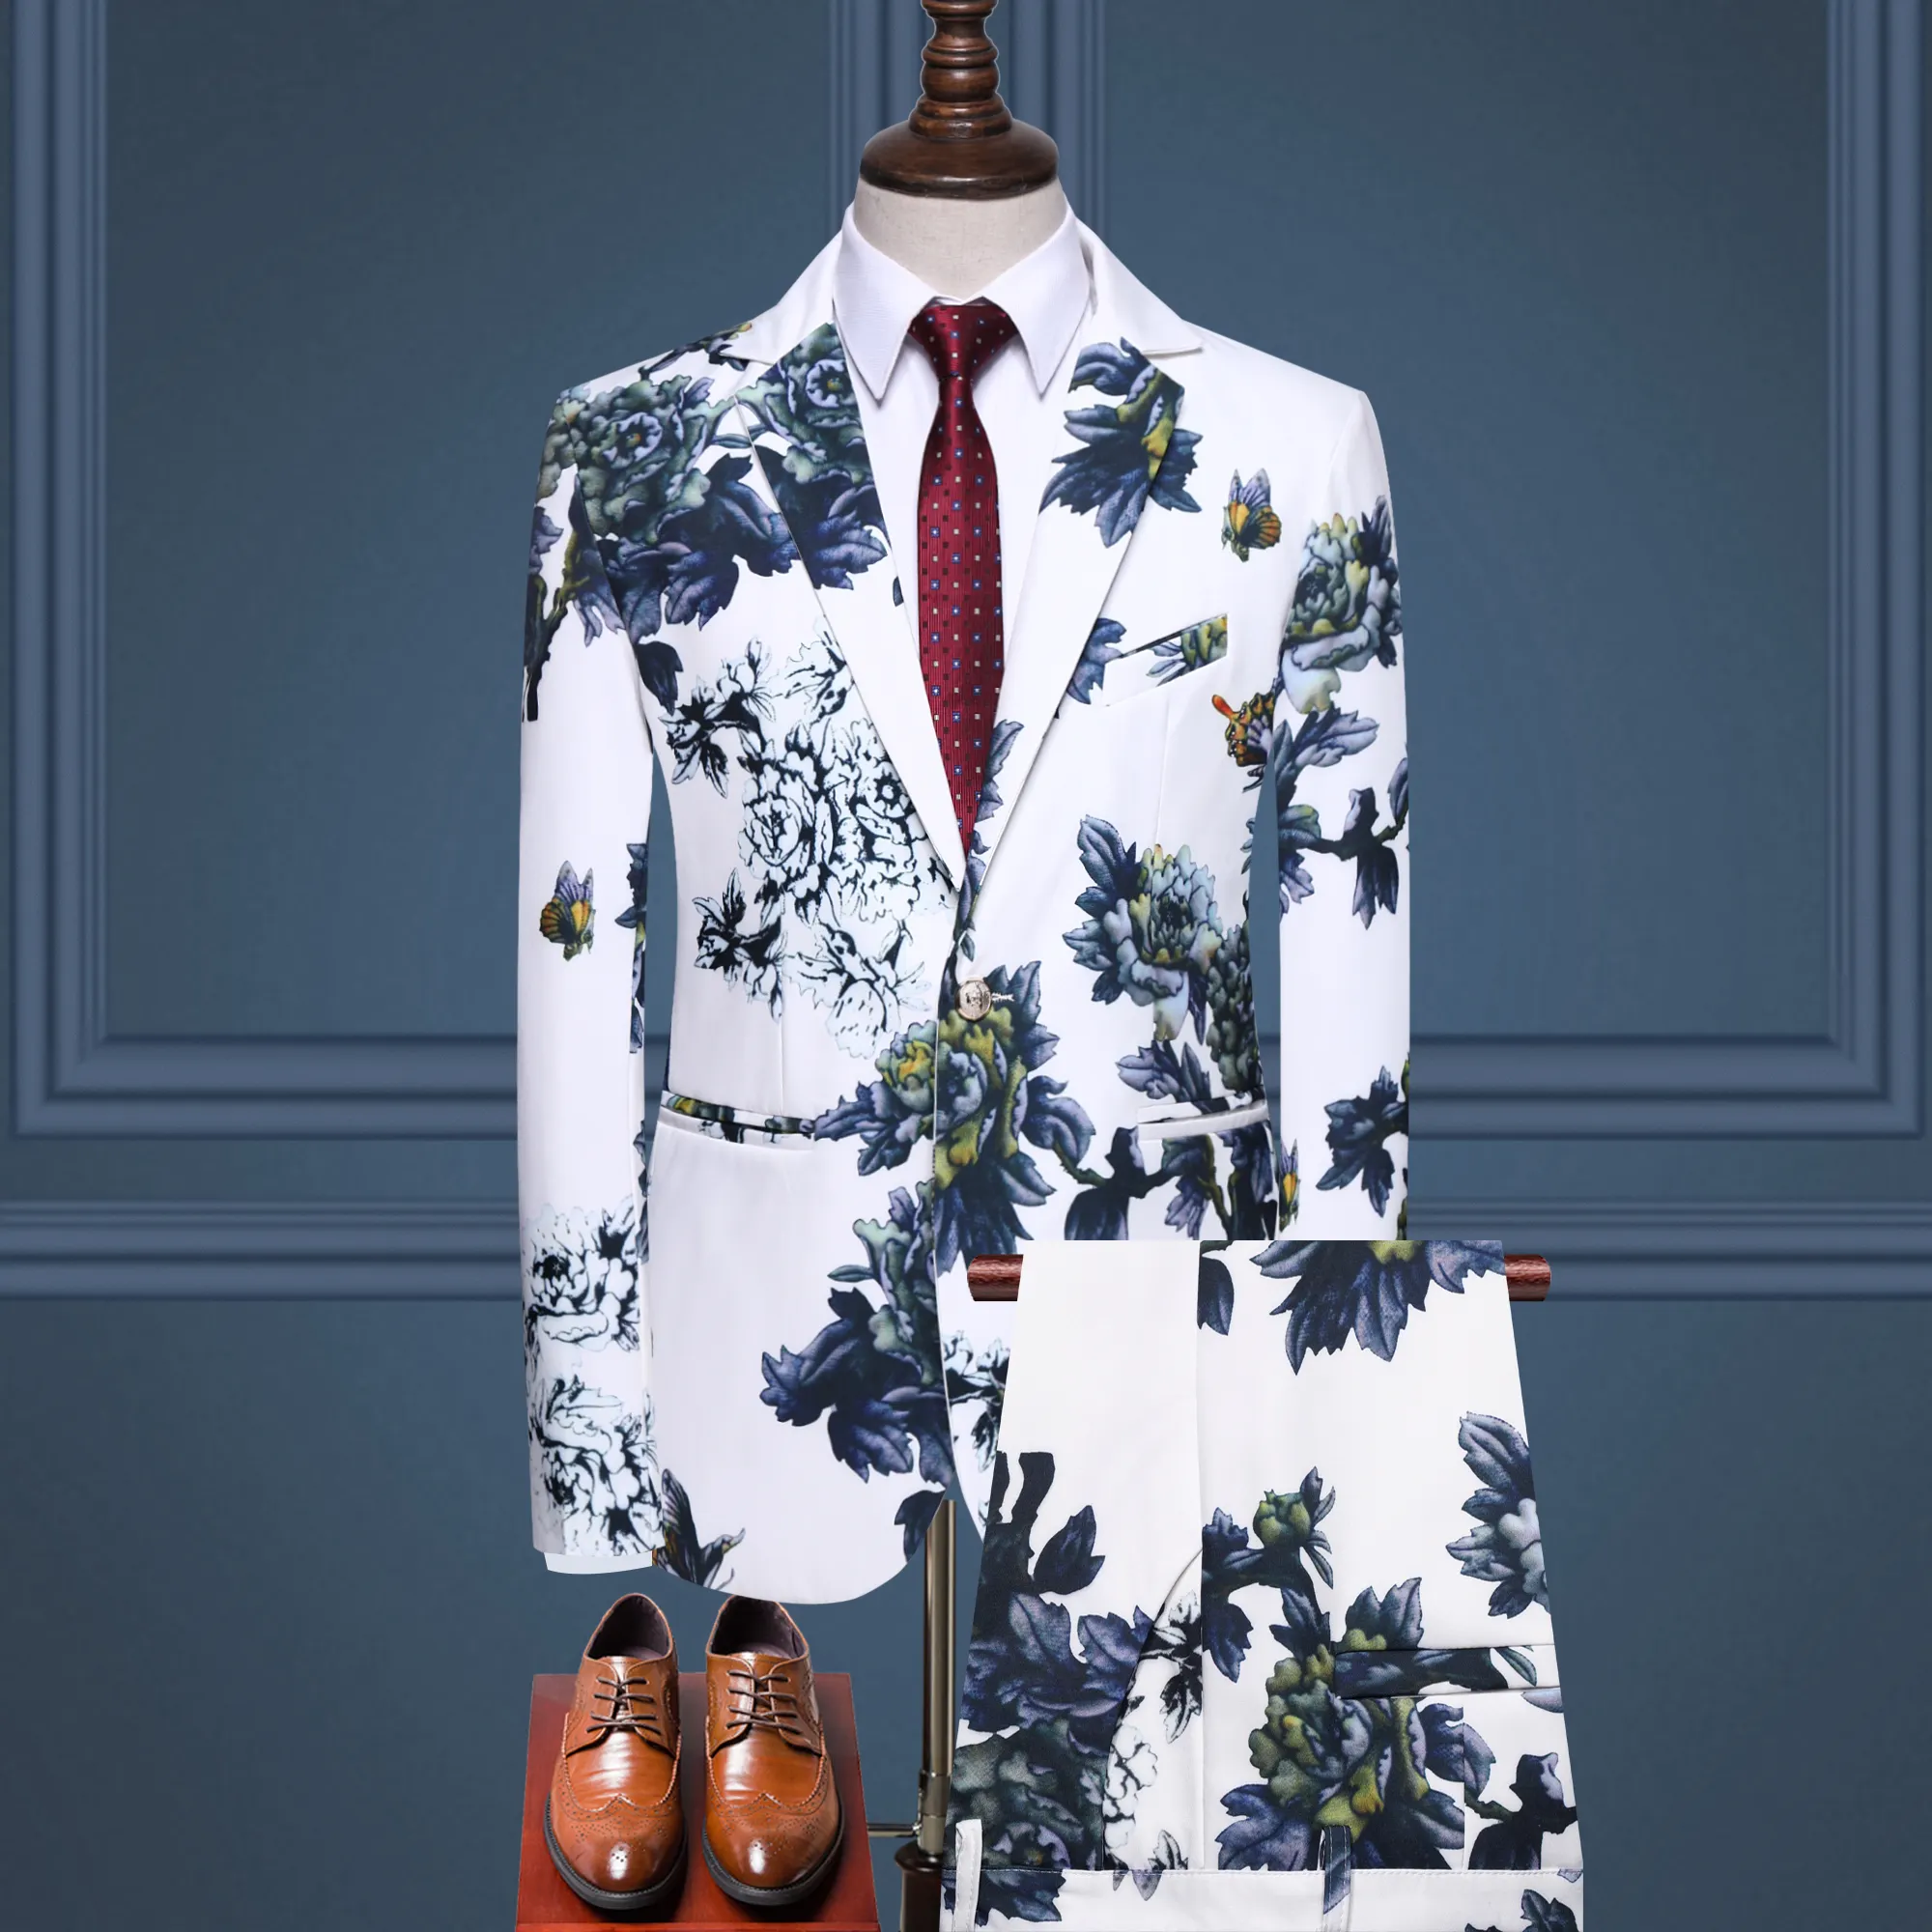 Classic Clothing for Night Club Banquet Floral printing 2 Piece slim fit men suits Casual Business Plus Size Suit for Men